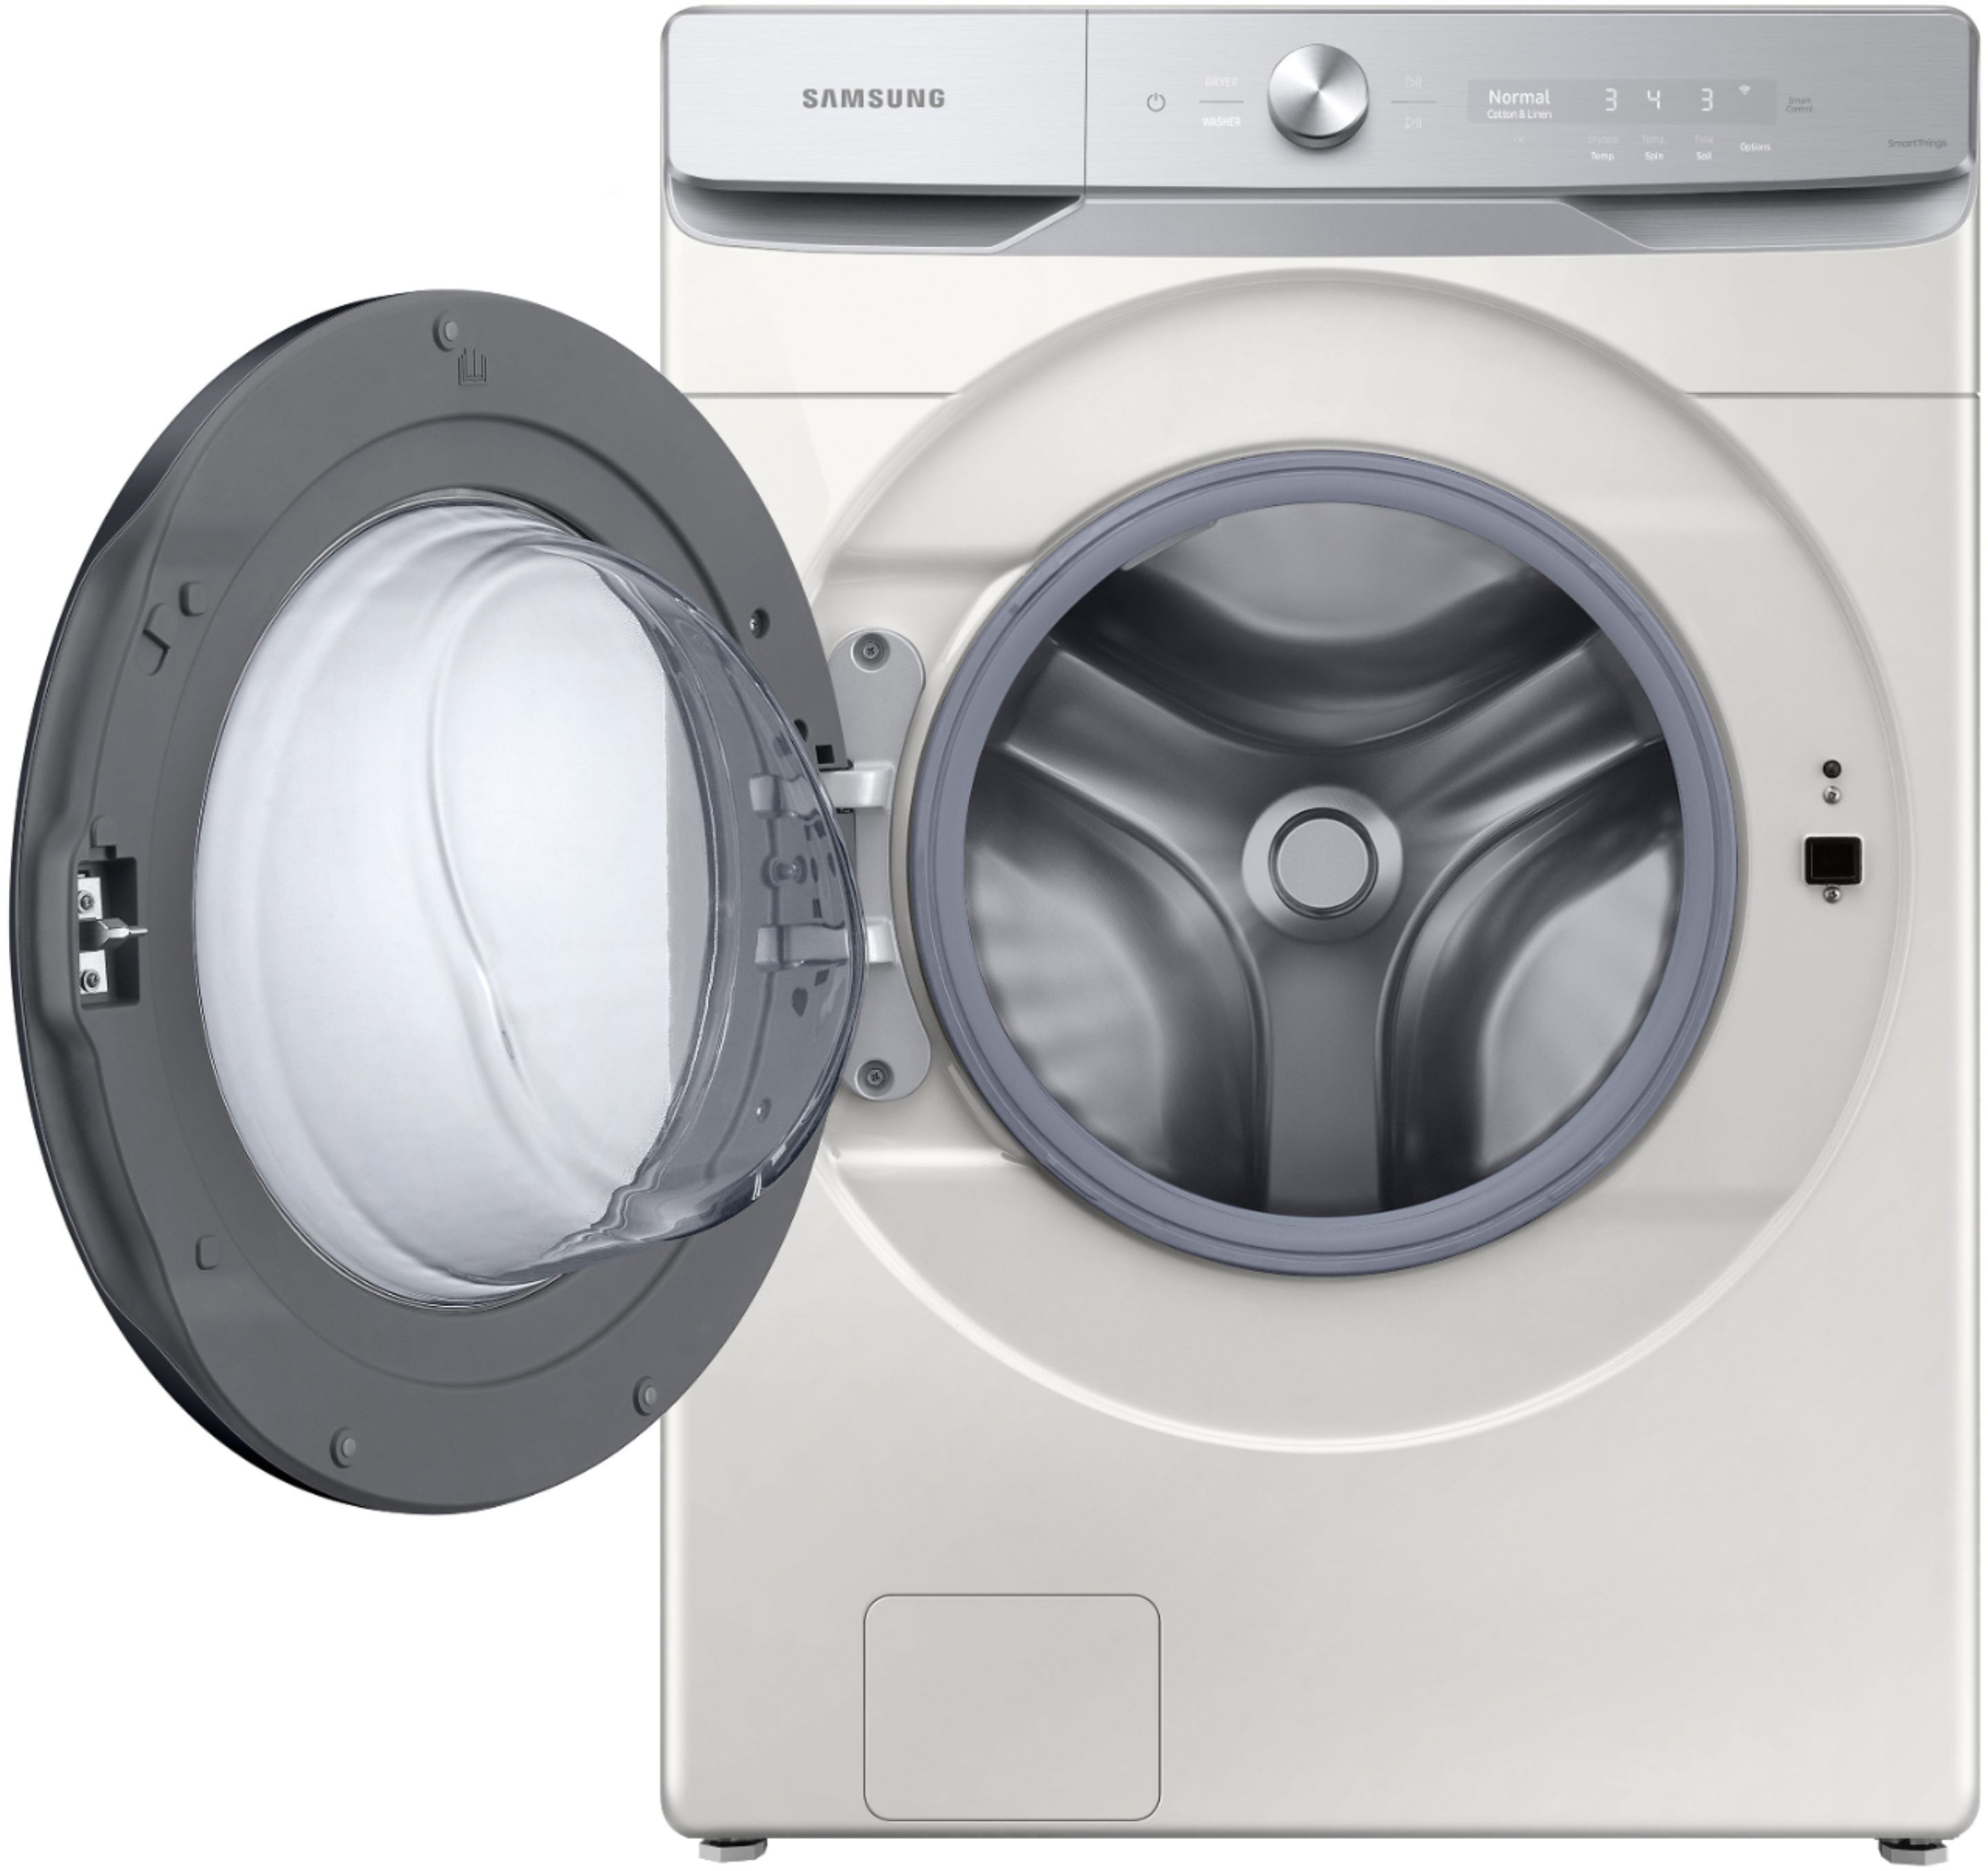 Samsung WF50A8600AV Front-load Washing Machine Review - Reviewed